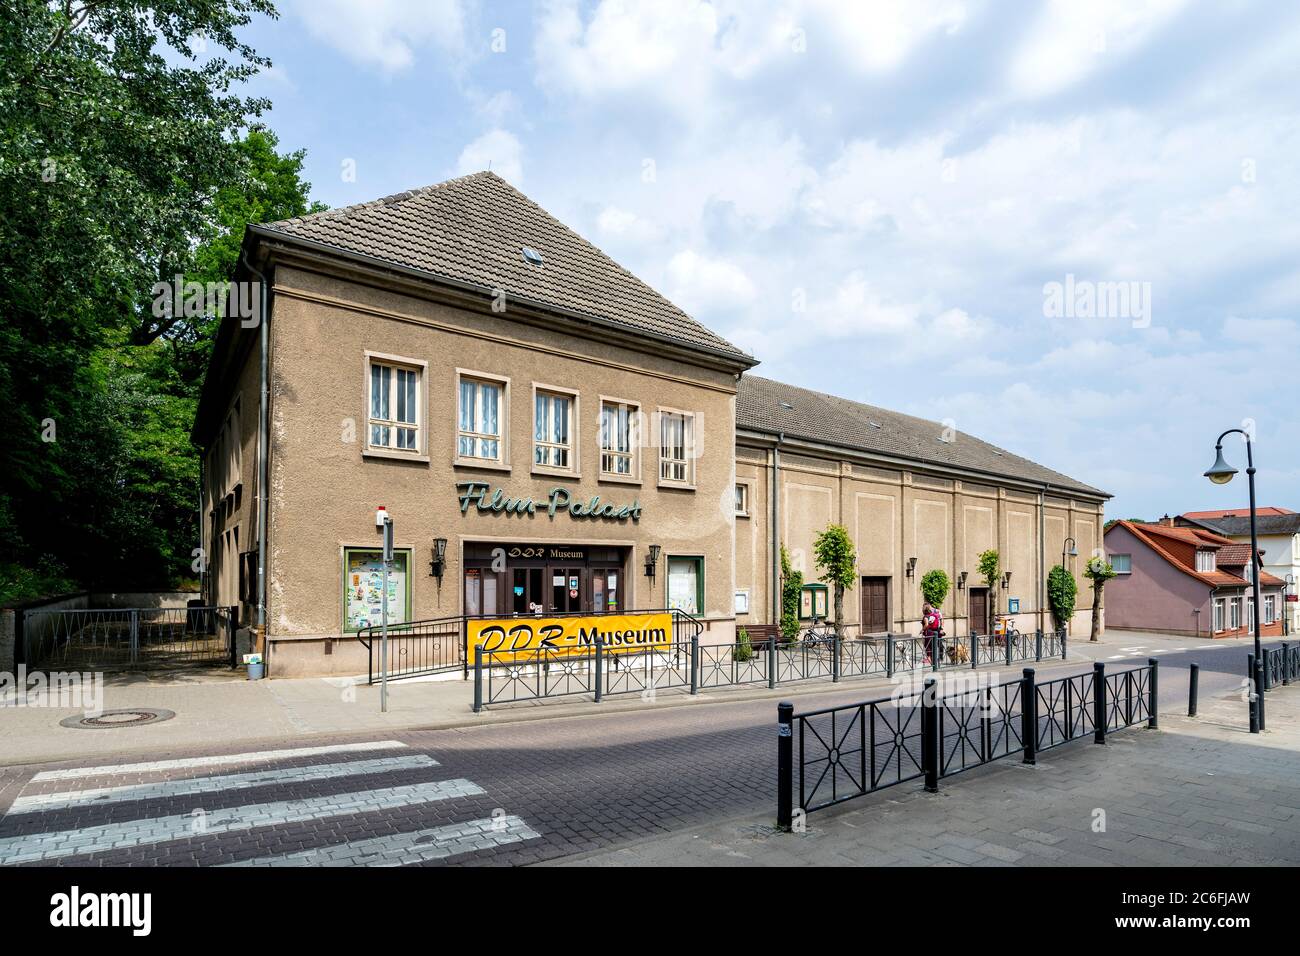 DDR Museum in a former cinema in Malchow, Germany. Stock Photo